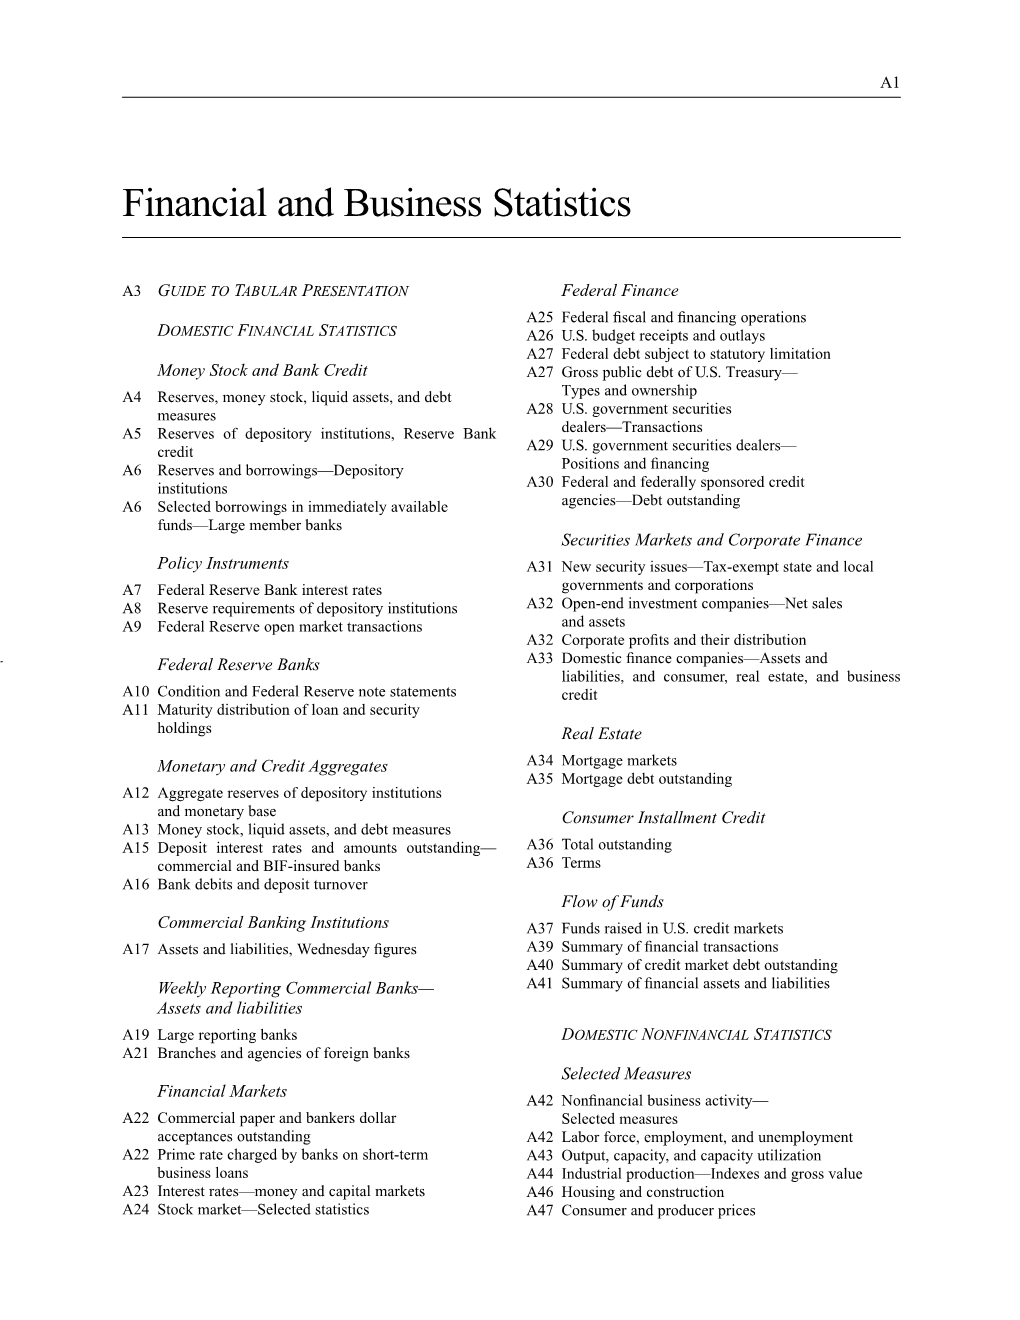 Financial and Business Statistics